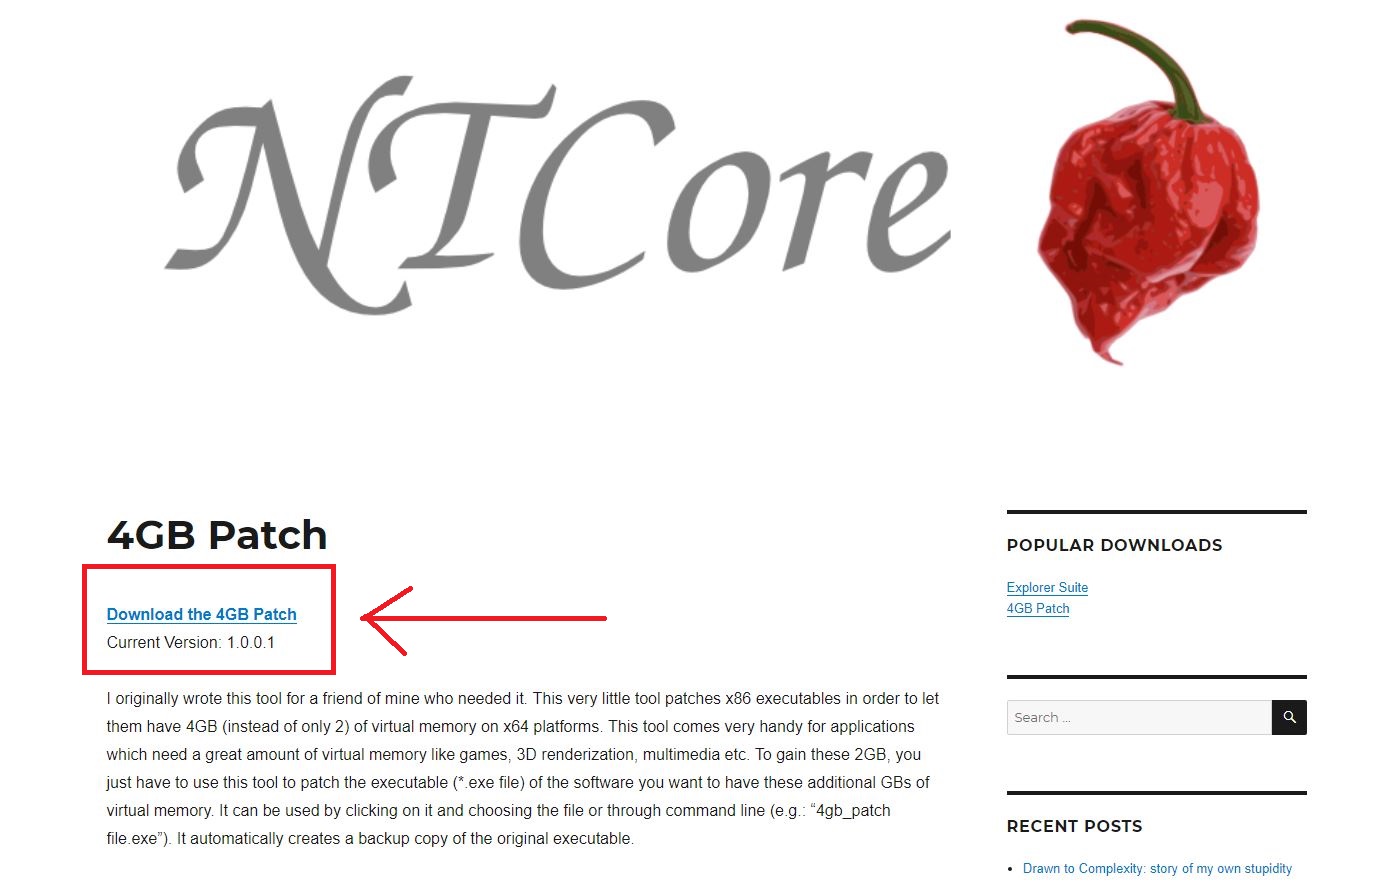 NTCore Website for 4GB Patch